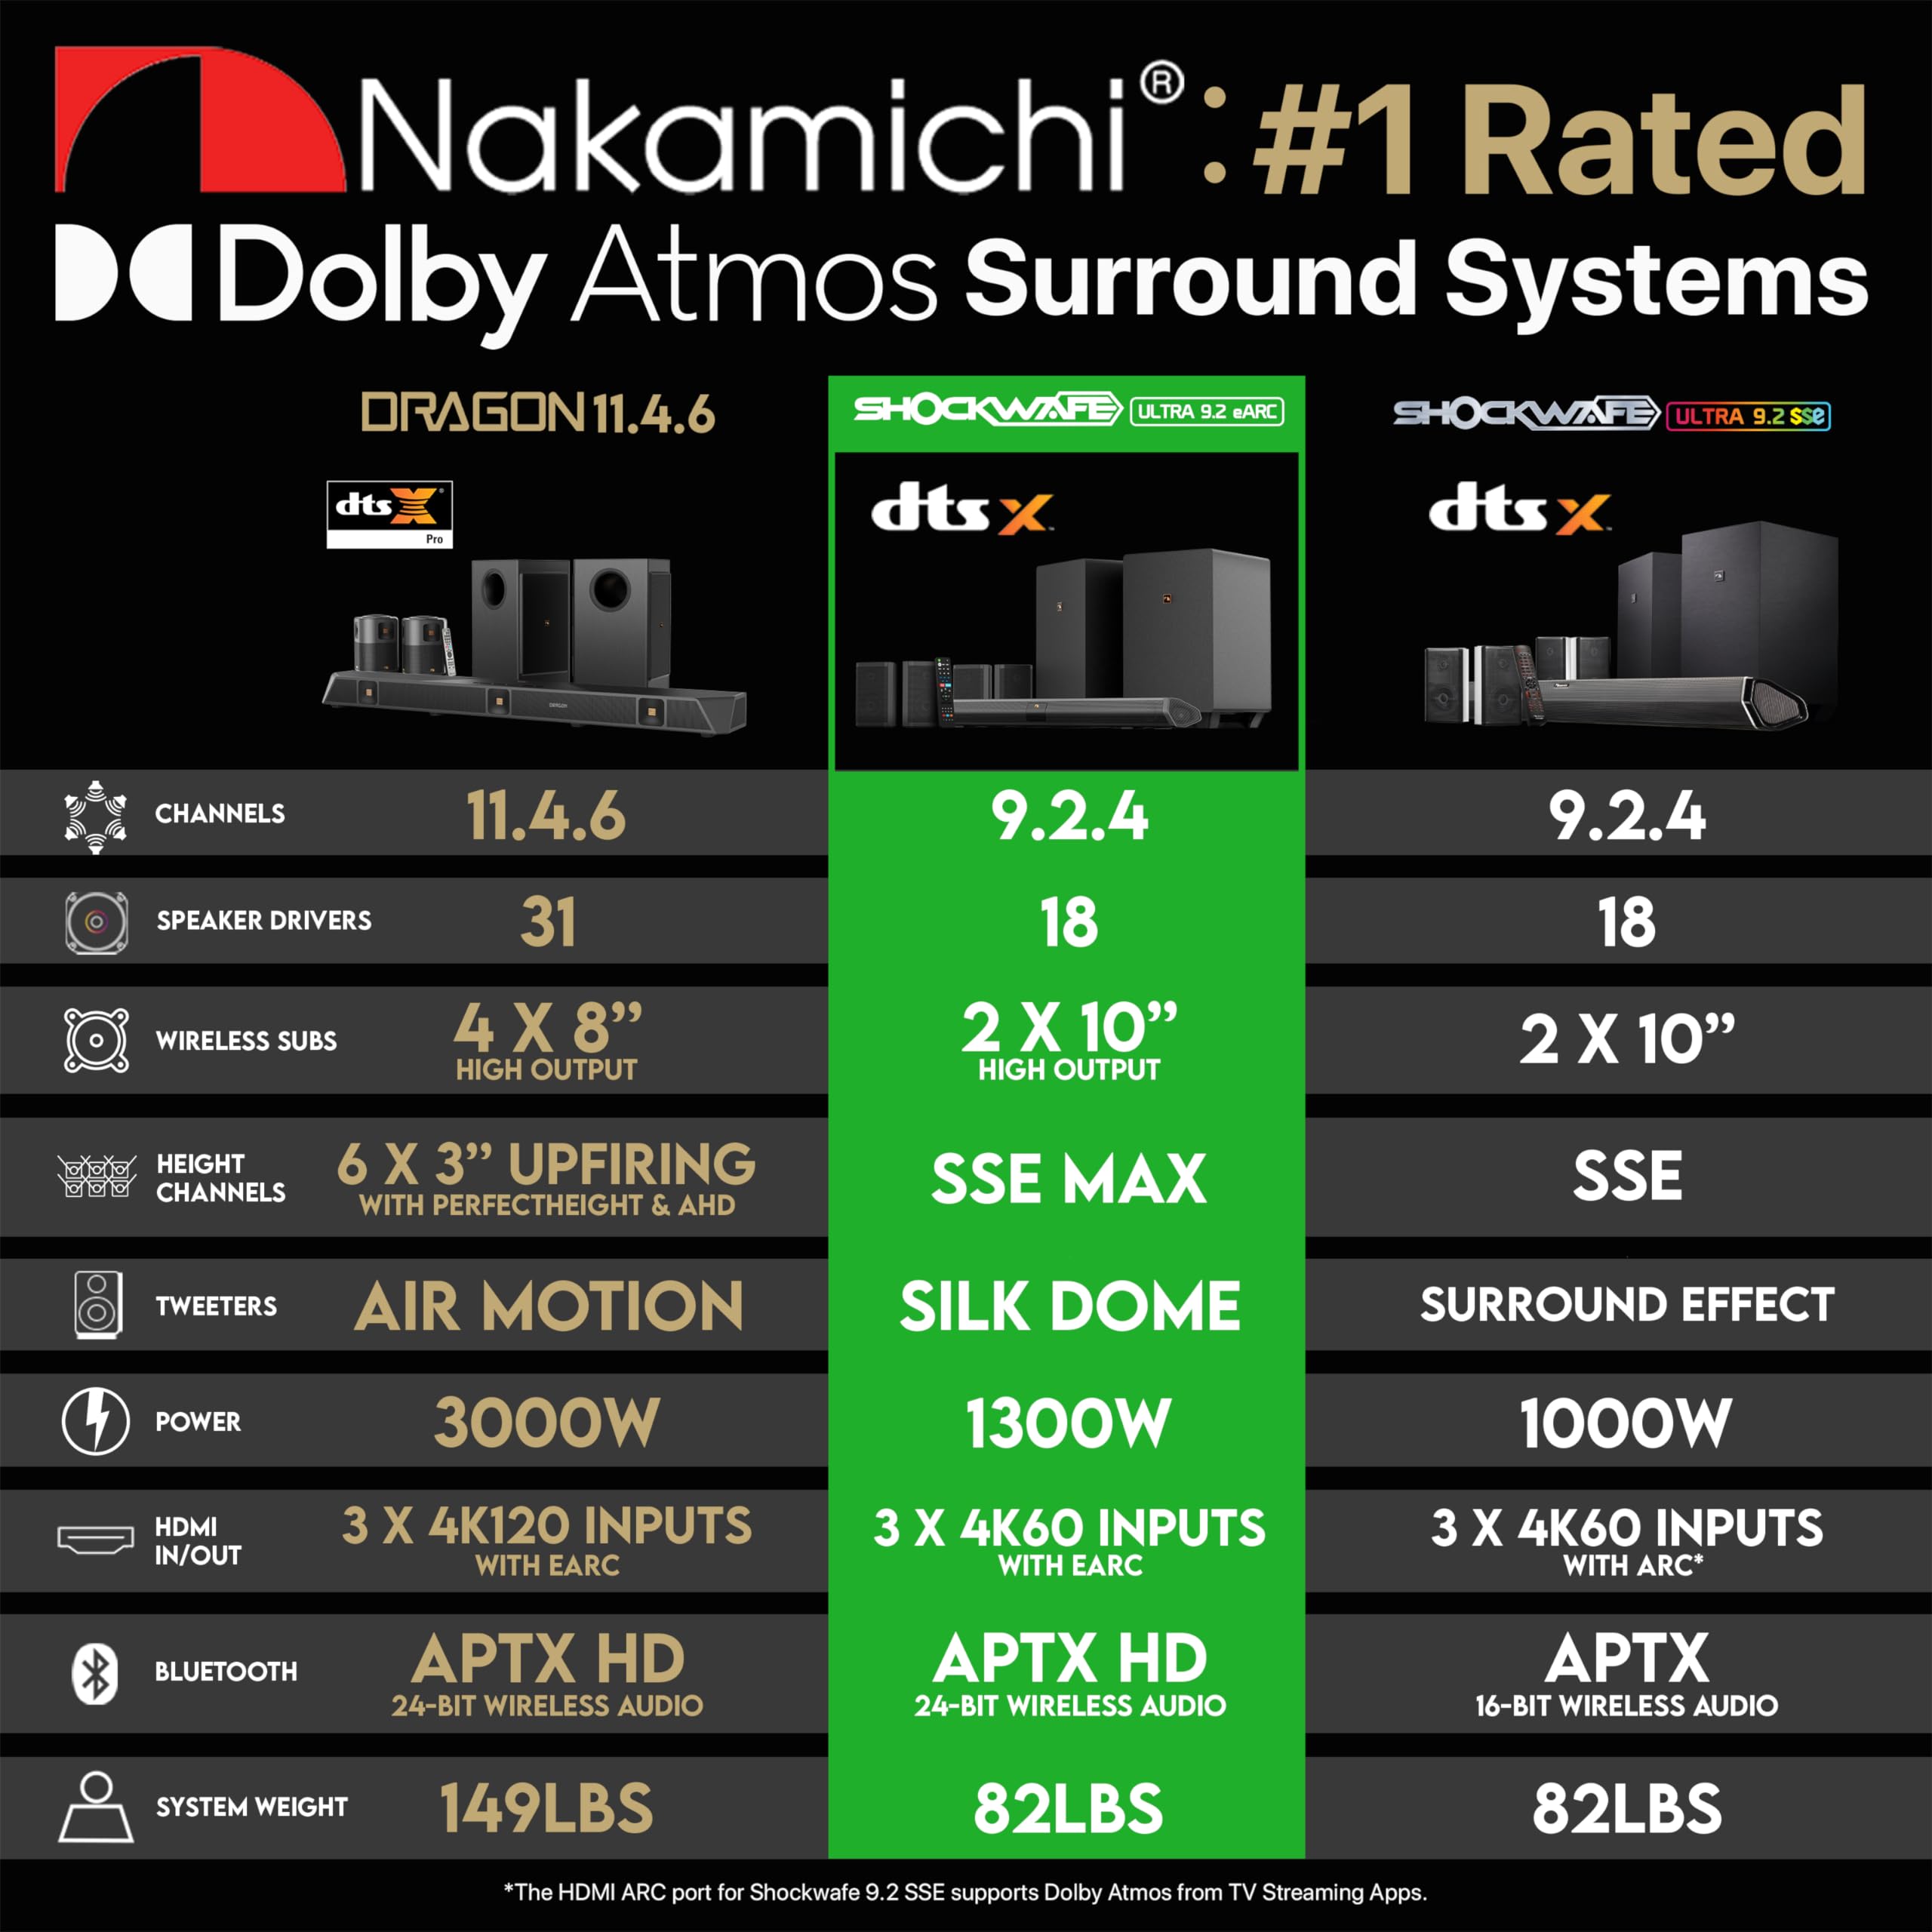 Nakamichi Shockwafe Ultra 9.2.4 Channel Dolby Atmos/DTS:X Soundbar with Dual 10" Subwoofers (Wireless), 4 Rear Surround Effects